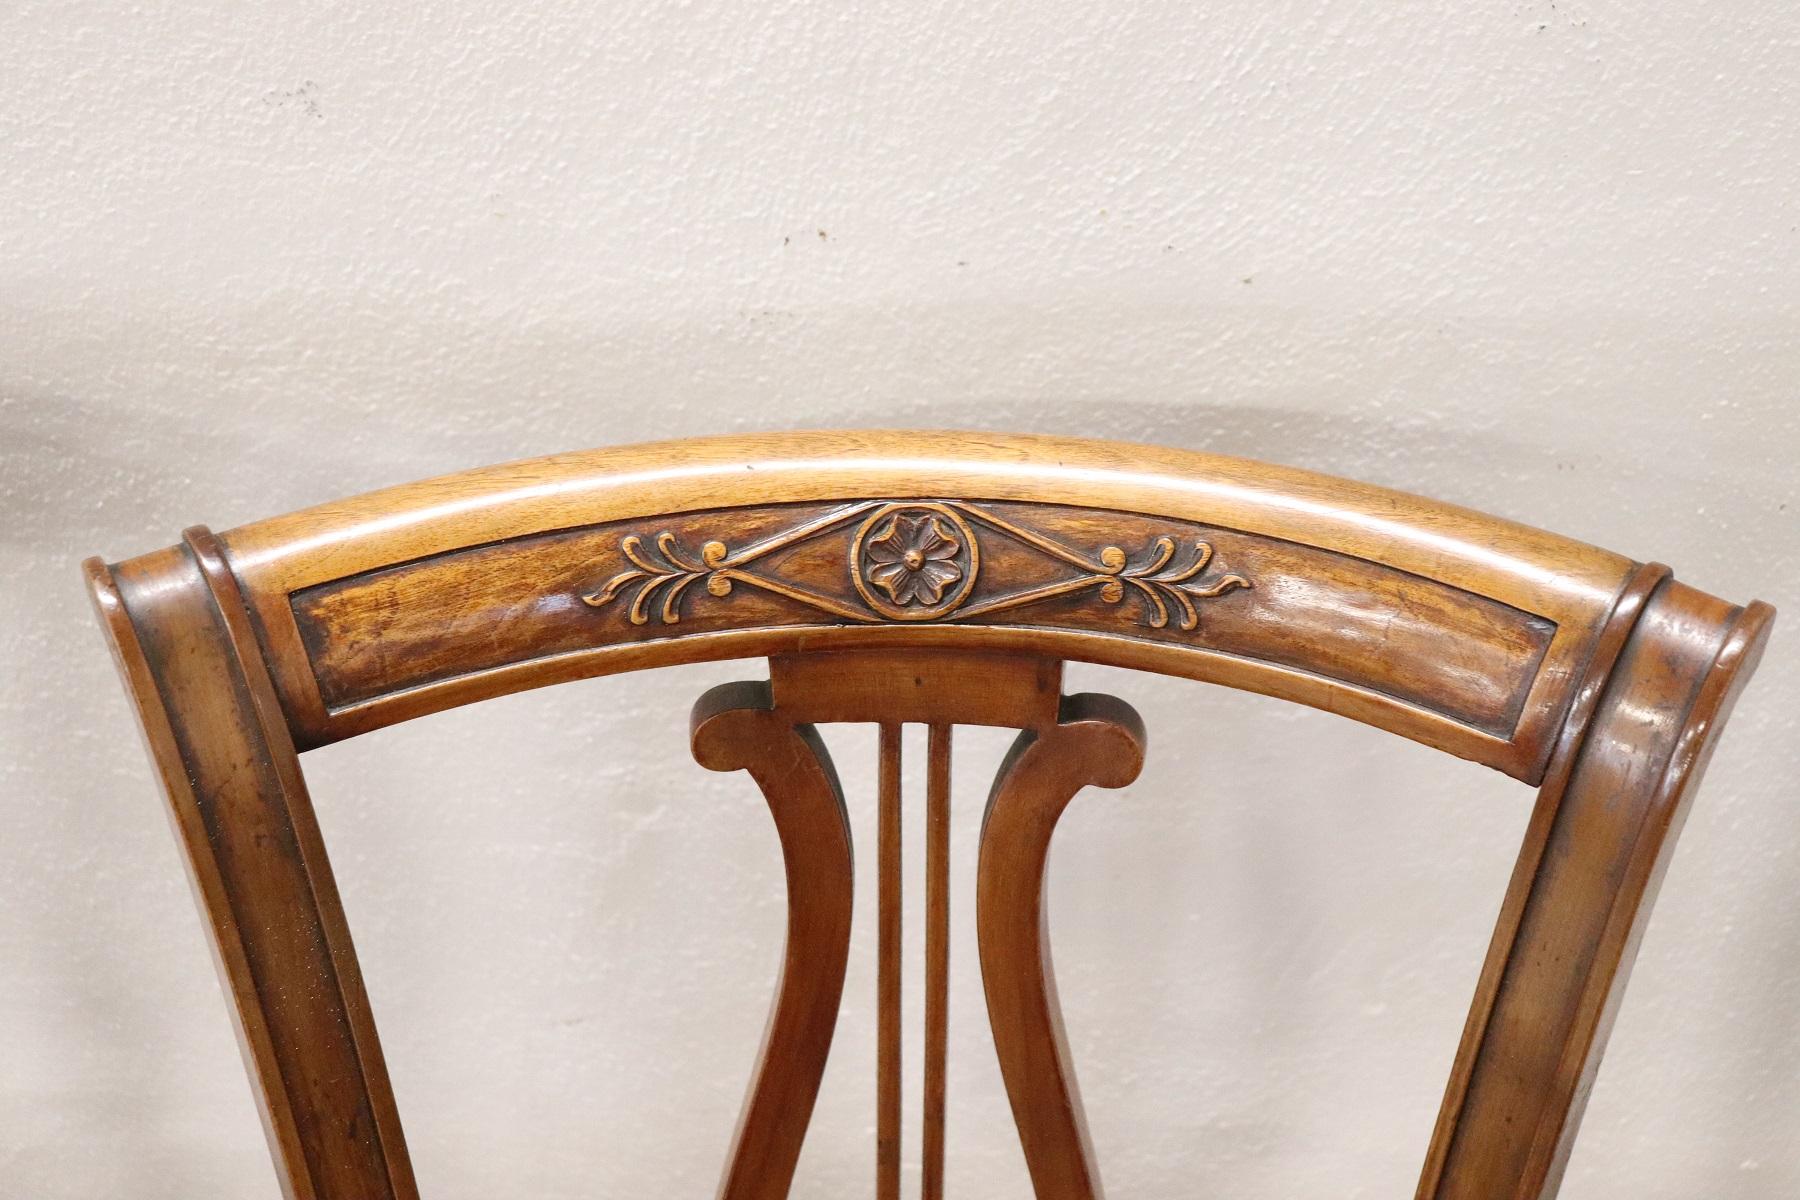 20th Century Italian Neoclassical Style Walnut Carved Set of Six Chairs (Italienisch)